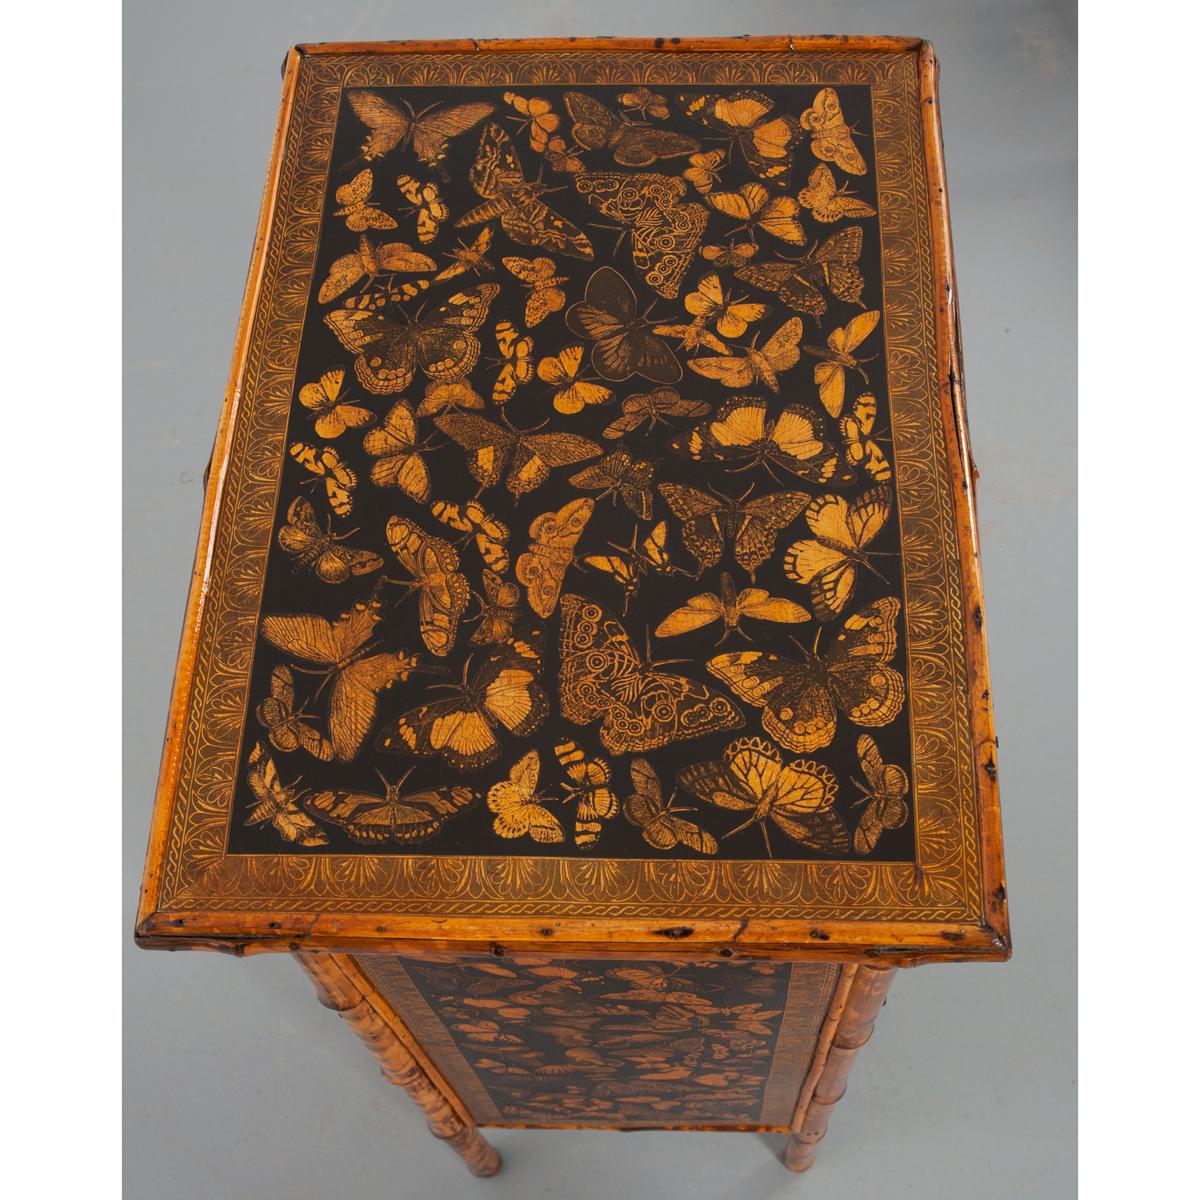 A wonderful bamboo cabinet with a single drawer and door. The drawer has a bail pull and the door has a simple knob. It has been recently découpaged with a moth and butterfly motif and decorative border on the front, sides and top. The door closes